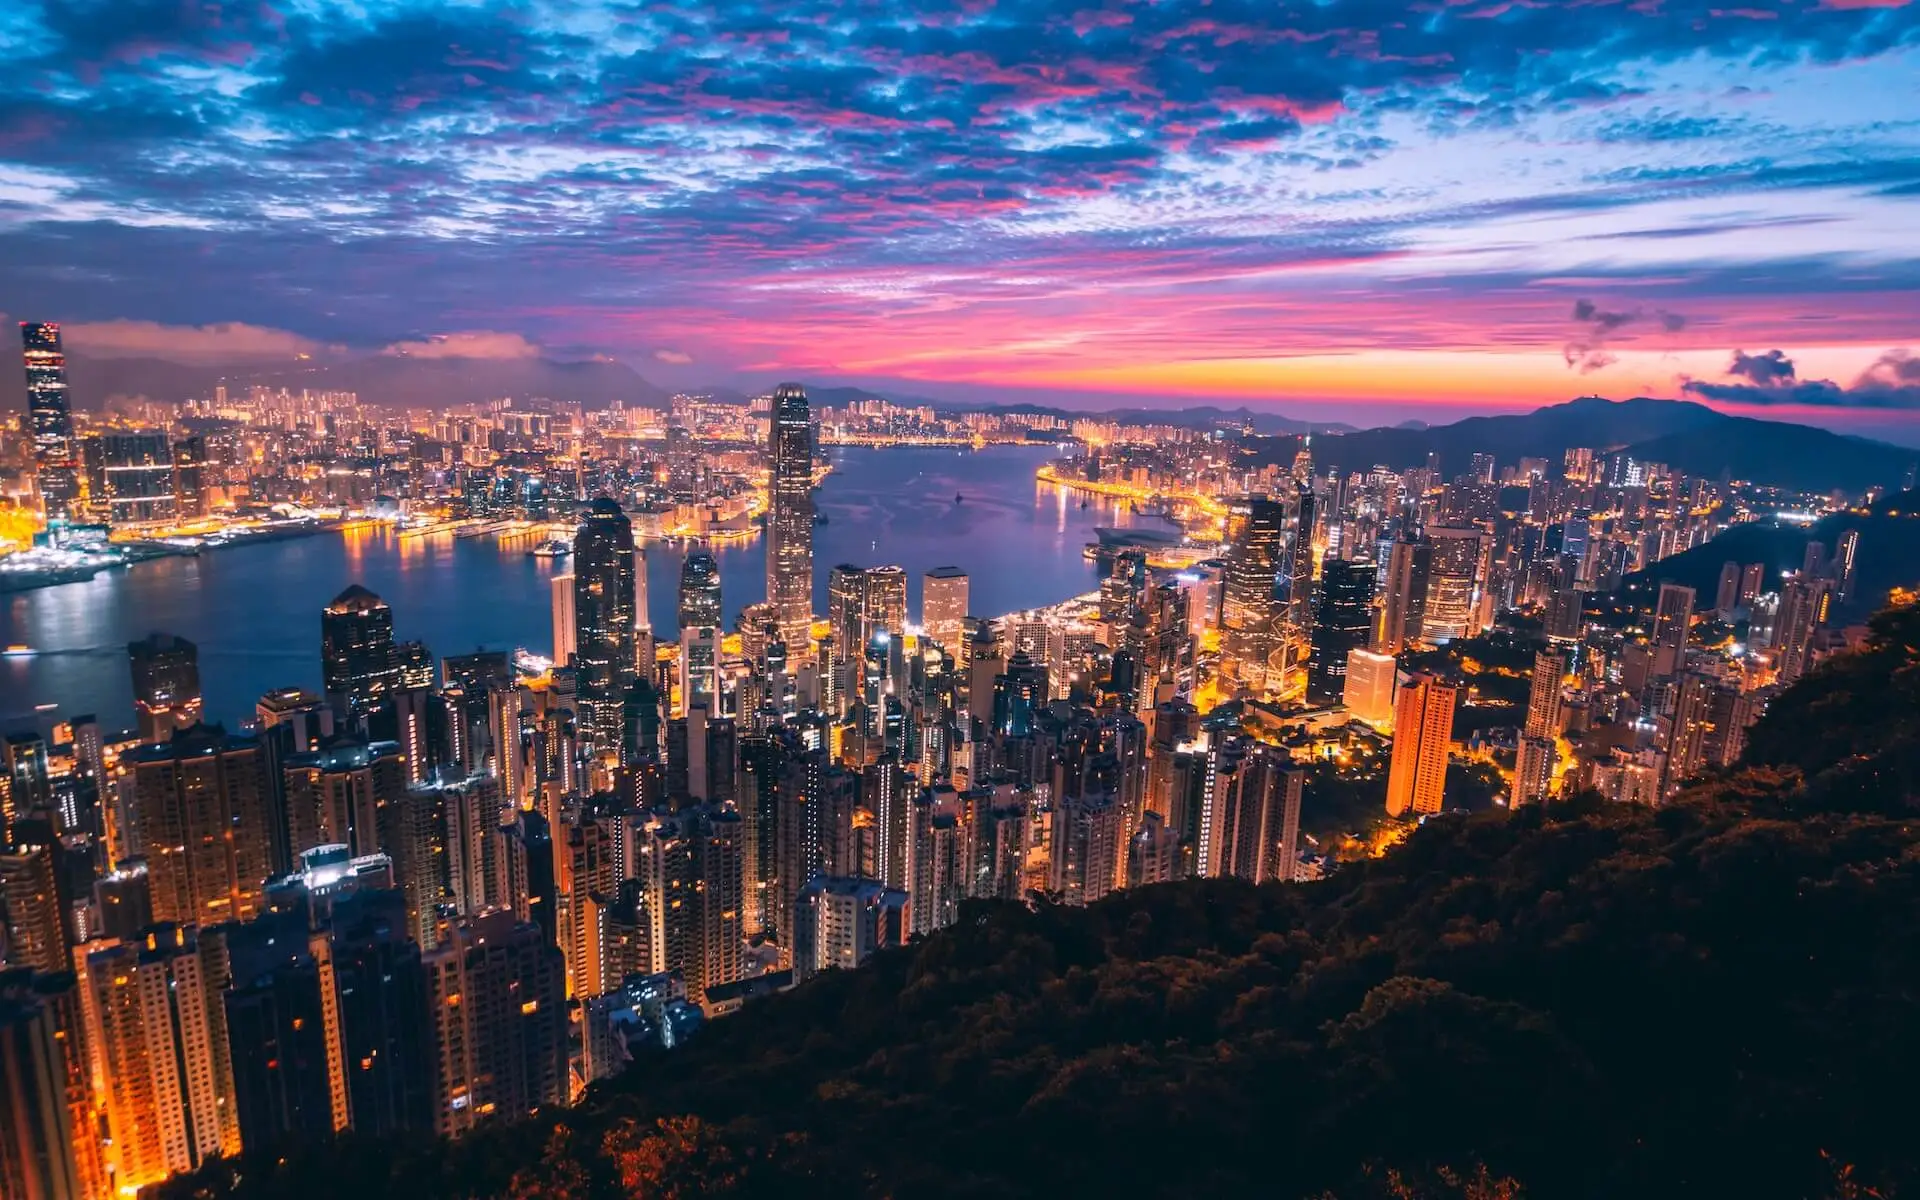 Hong Kong Provides People with Peak Internet Speed and Quality Services Across the Region